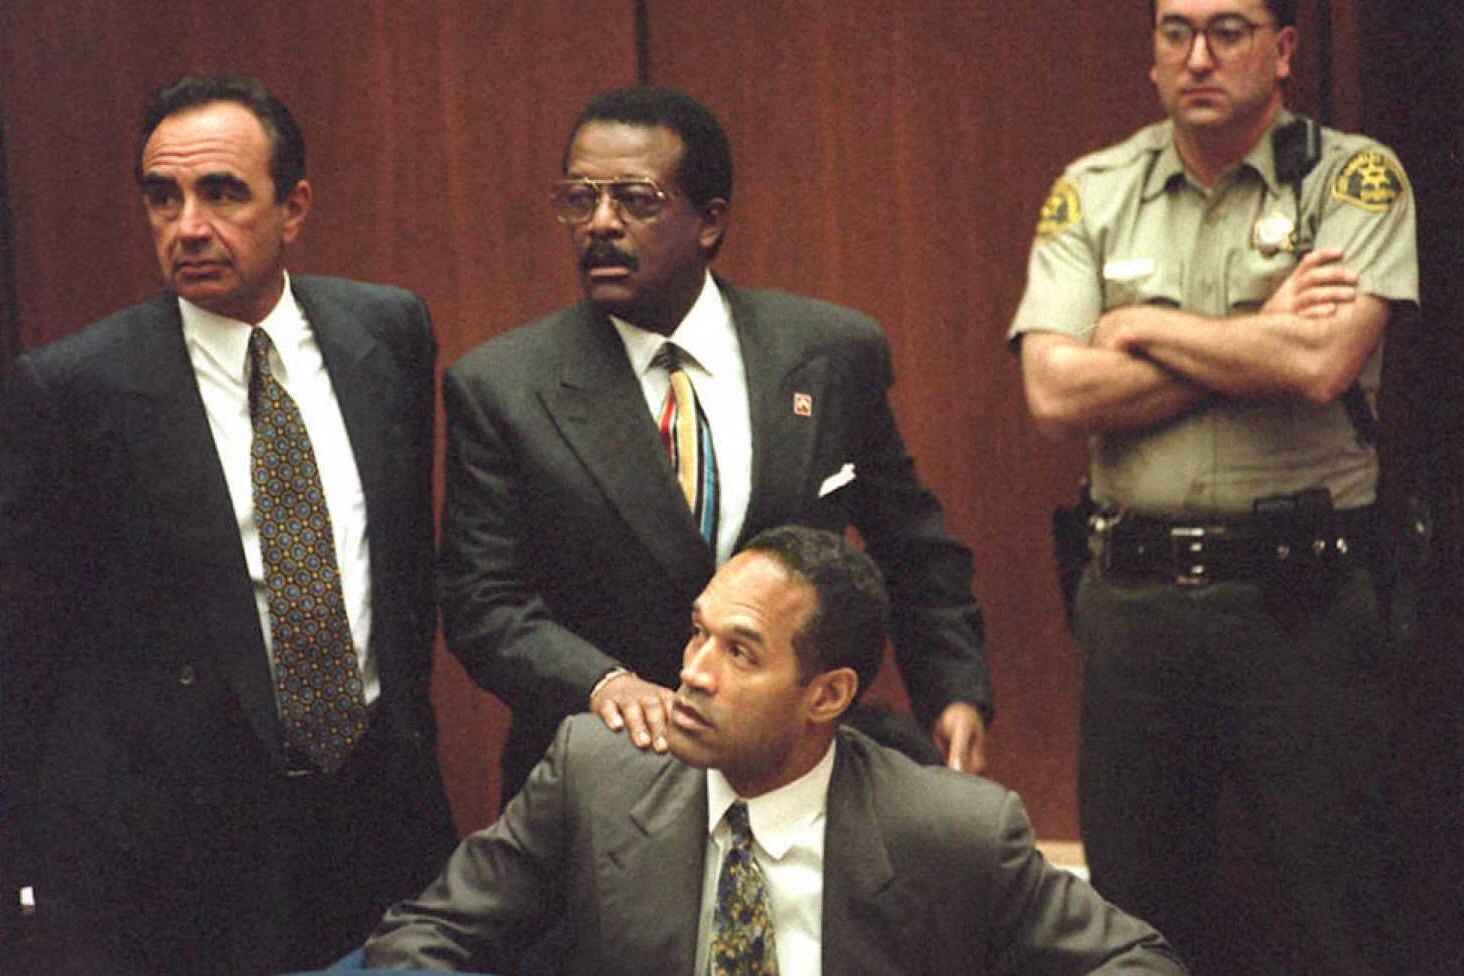 Johnnie Cochran Jr. puts his hand on the shoulder of O.J. Simpson during a hearing.